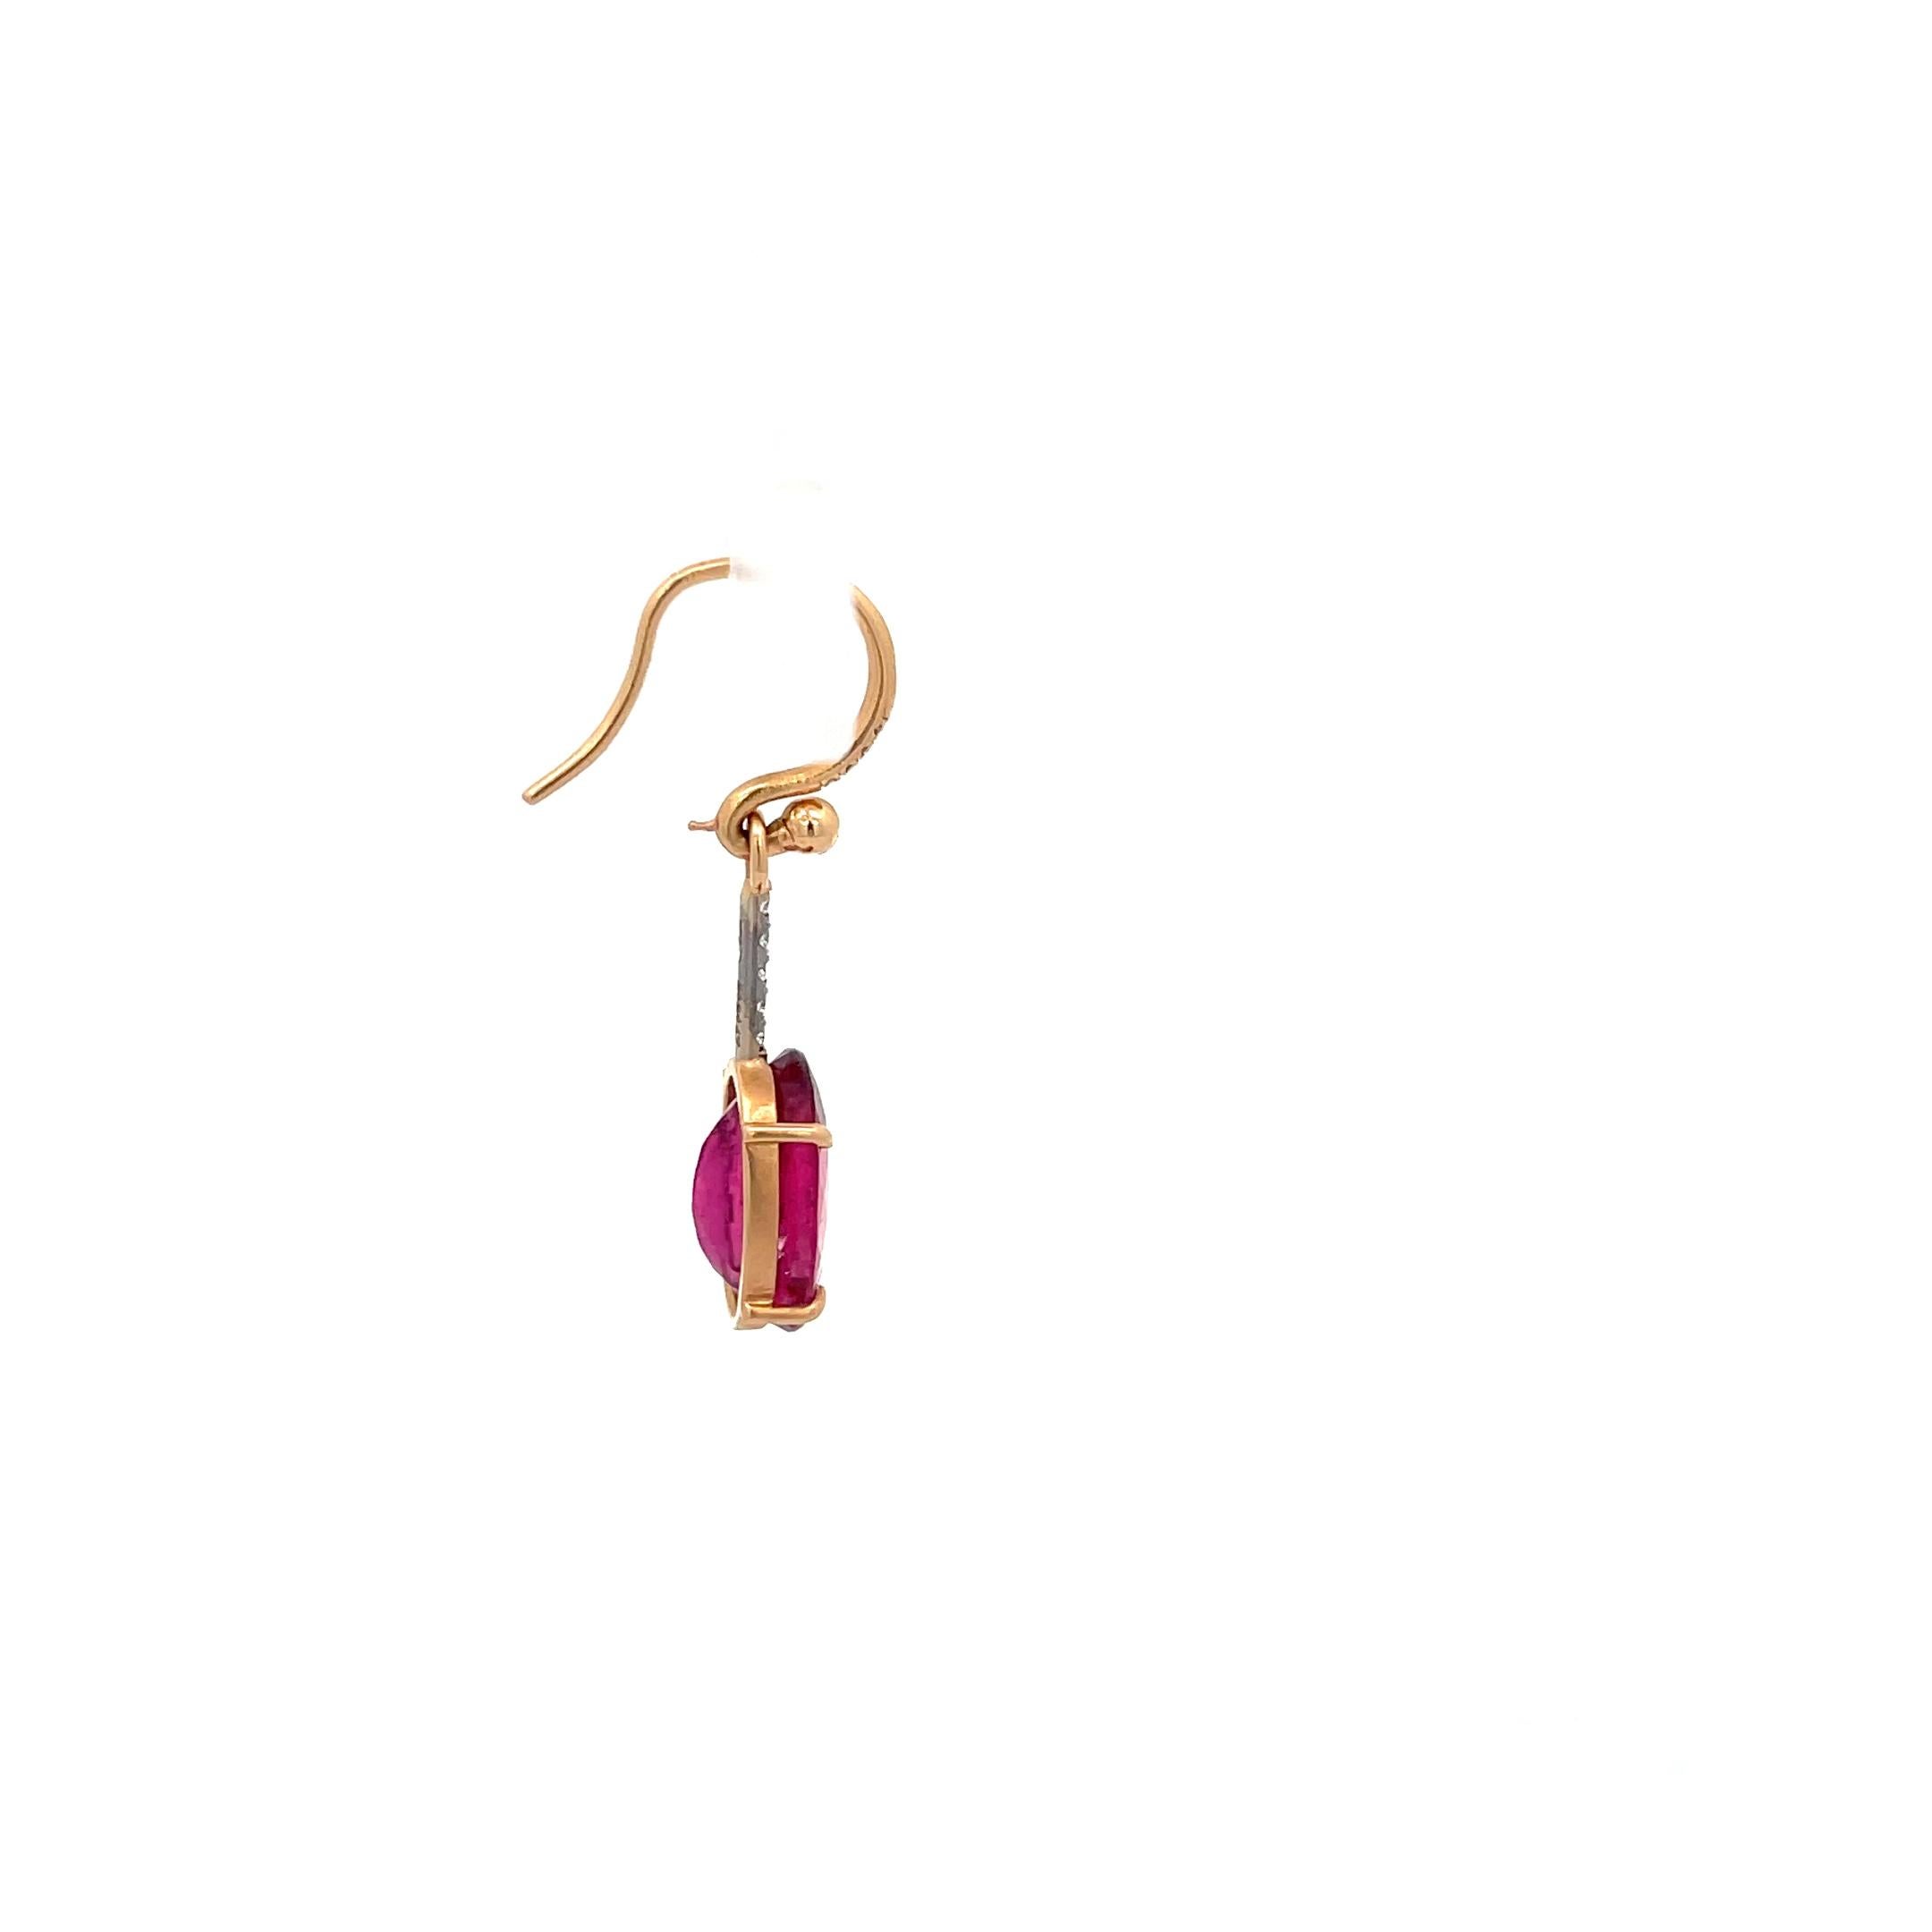 Irene Neuwirth Diamond and Tourmaline Single Earring 18K Rose Gold In Excellent Condition For Sale In Dallas, TX